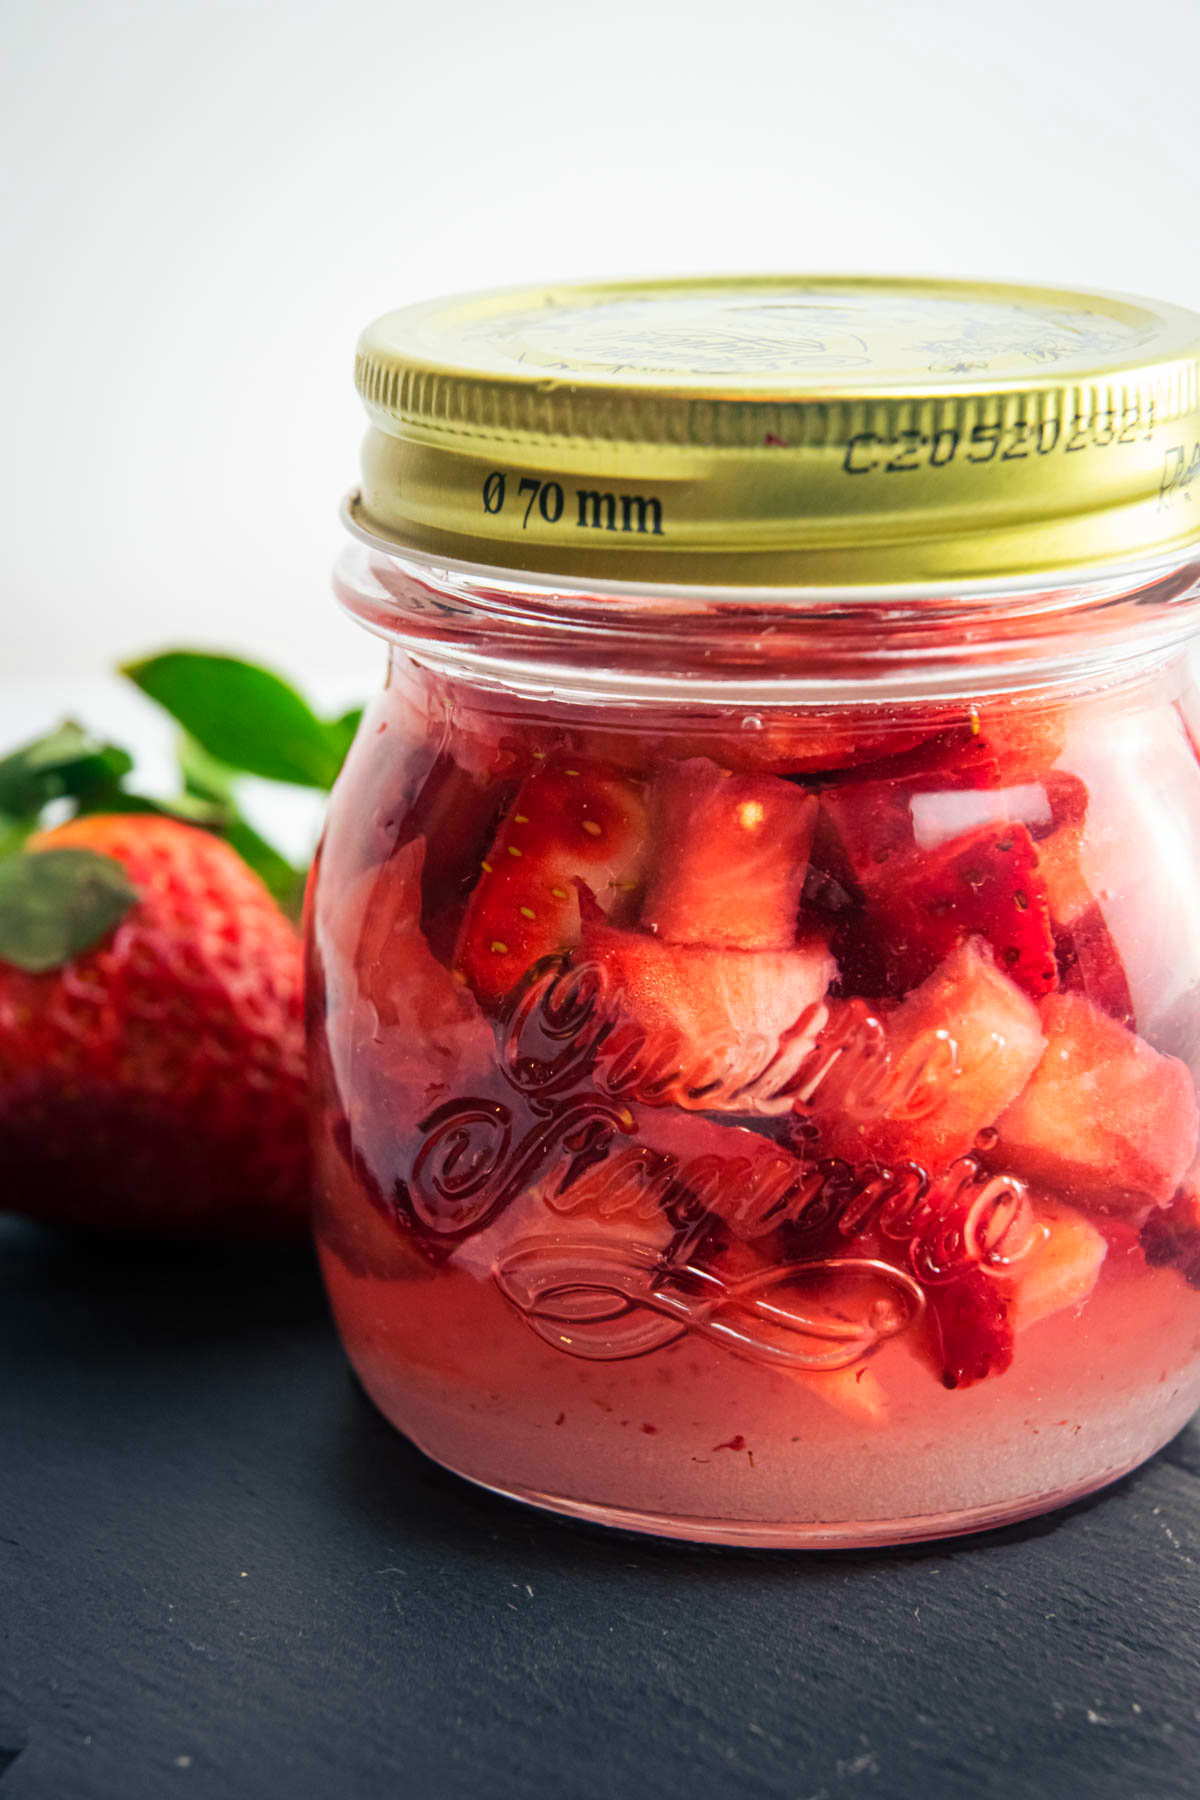 Vodka strawberry infusion in a jar.